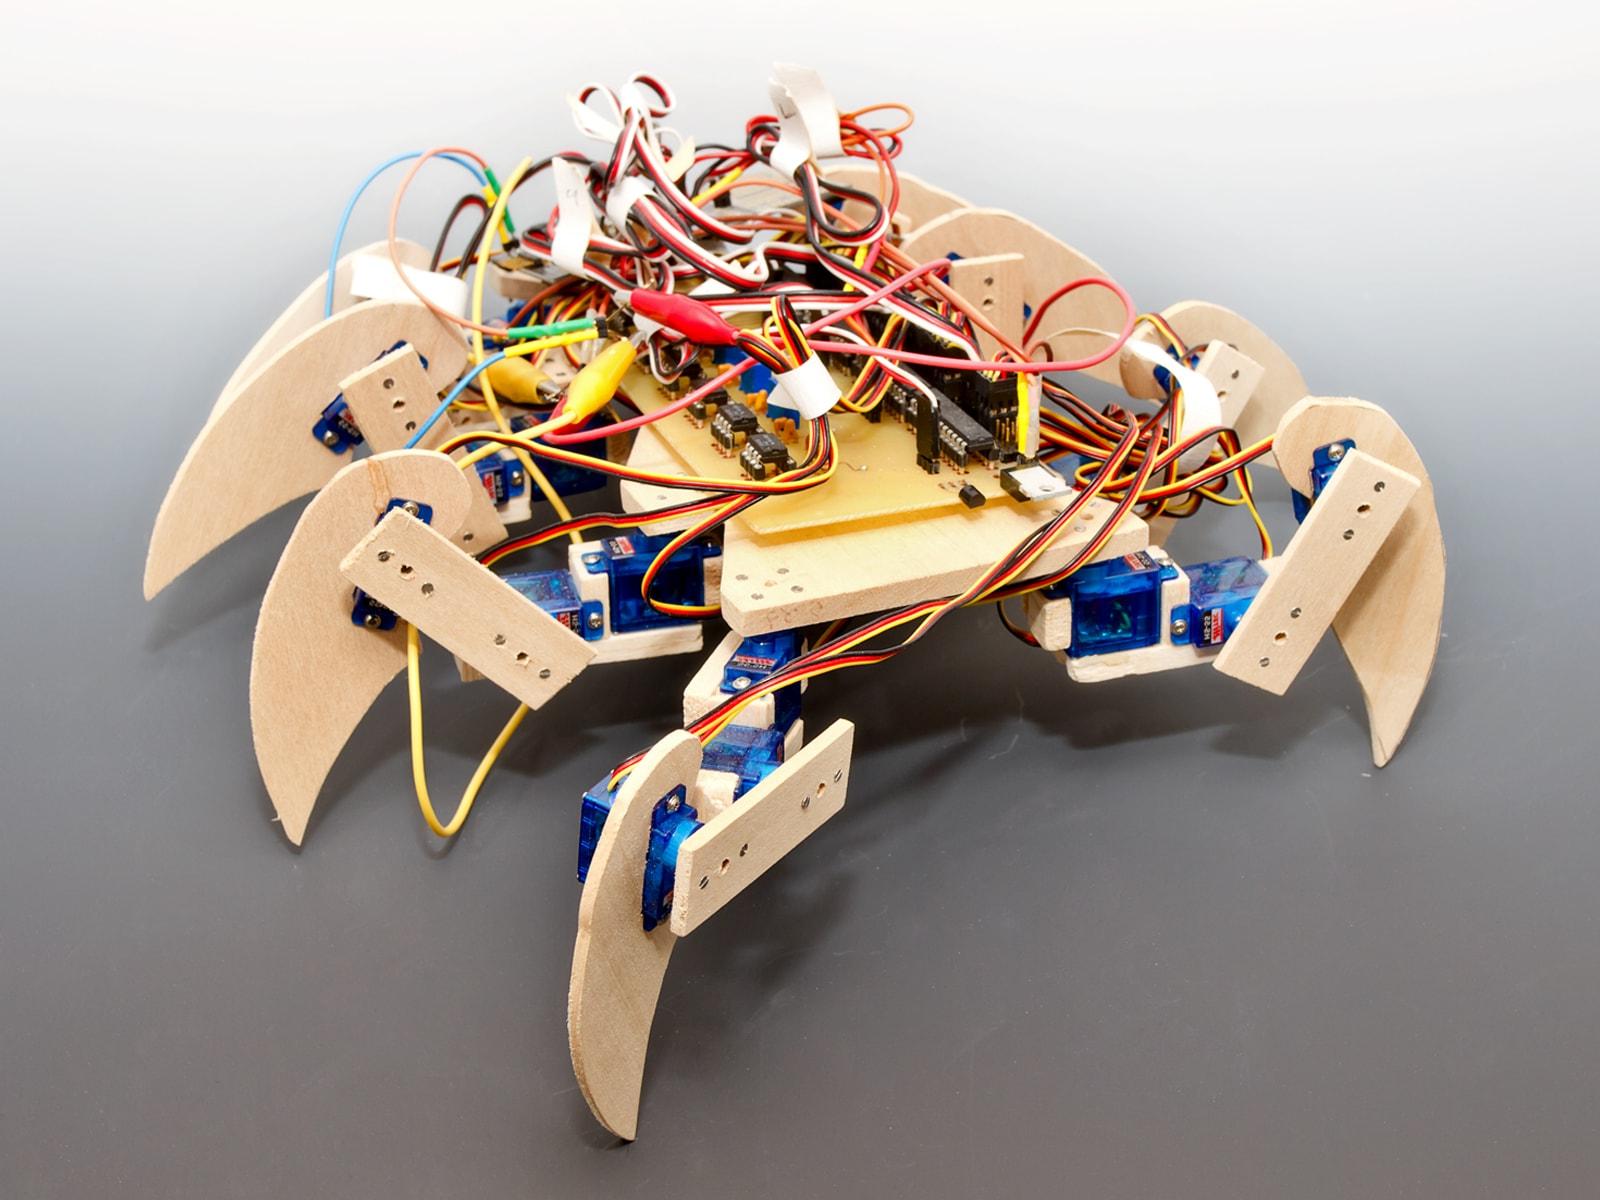 An eight-legged scorpion-like robot with exposed circuits.